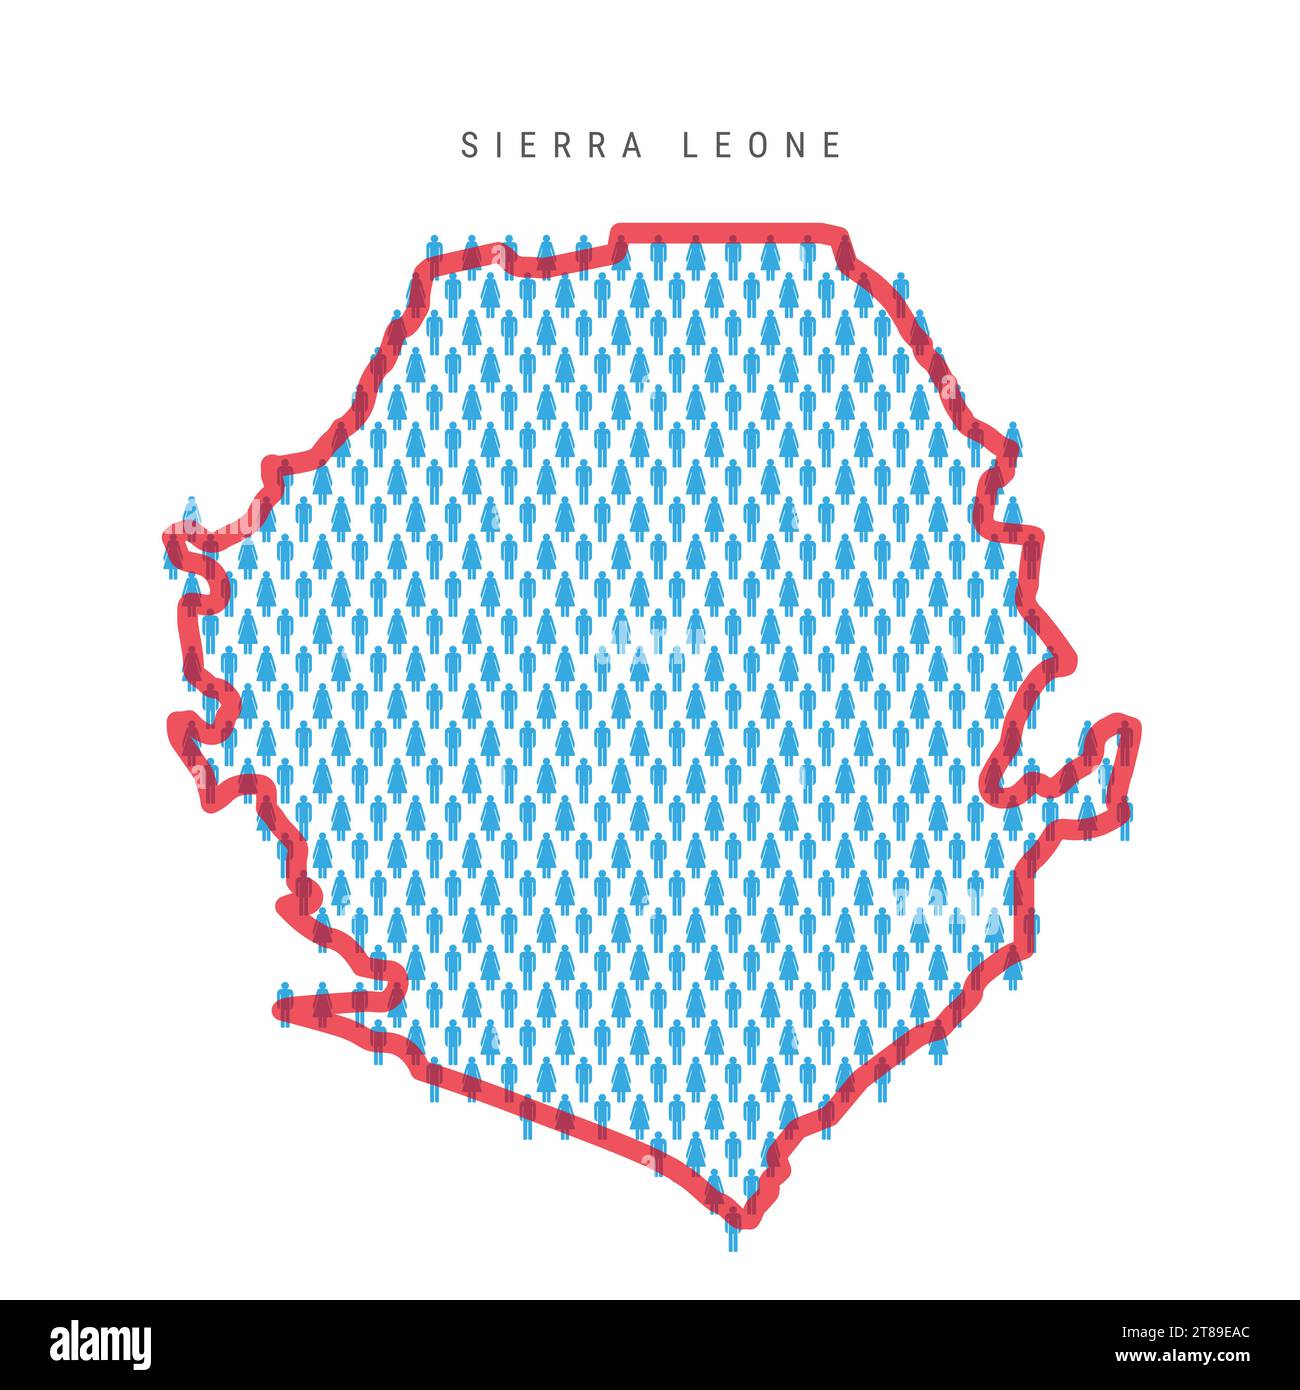 Sierra Leone population map. Stick figures Salone people map with bold red translucent country border. Pattern of men and women icons. Isolated vector Stock Vector